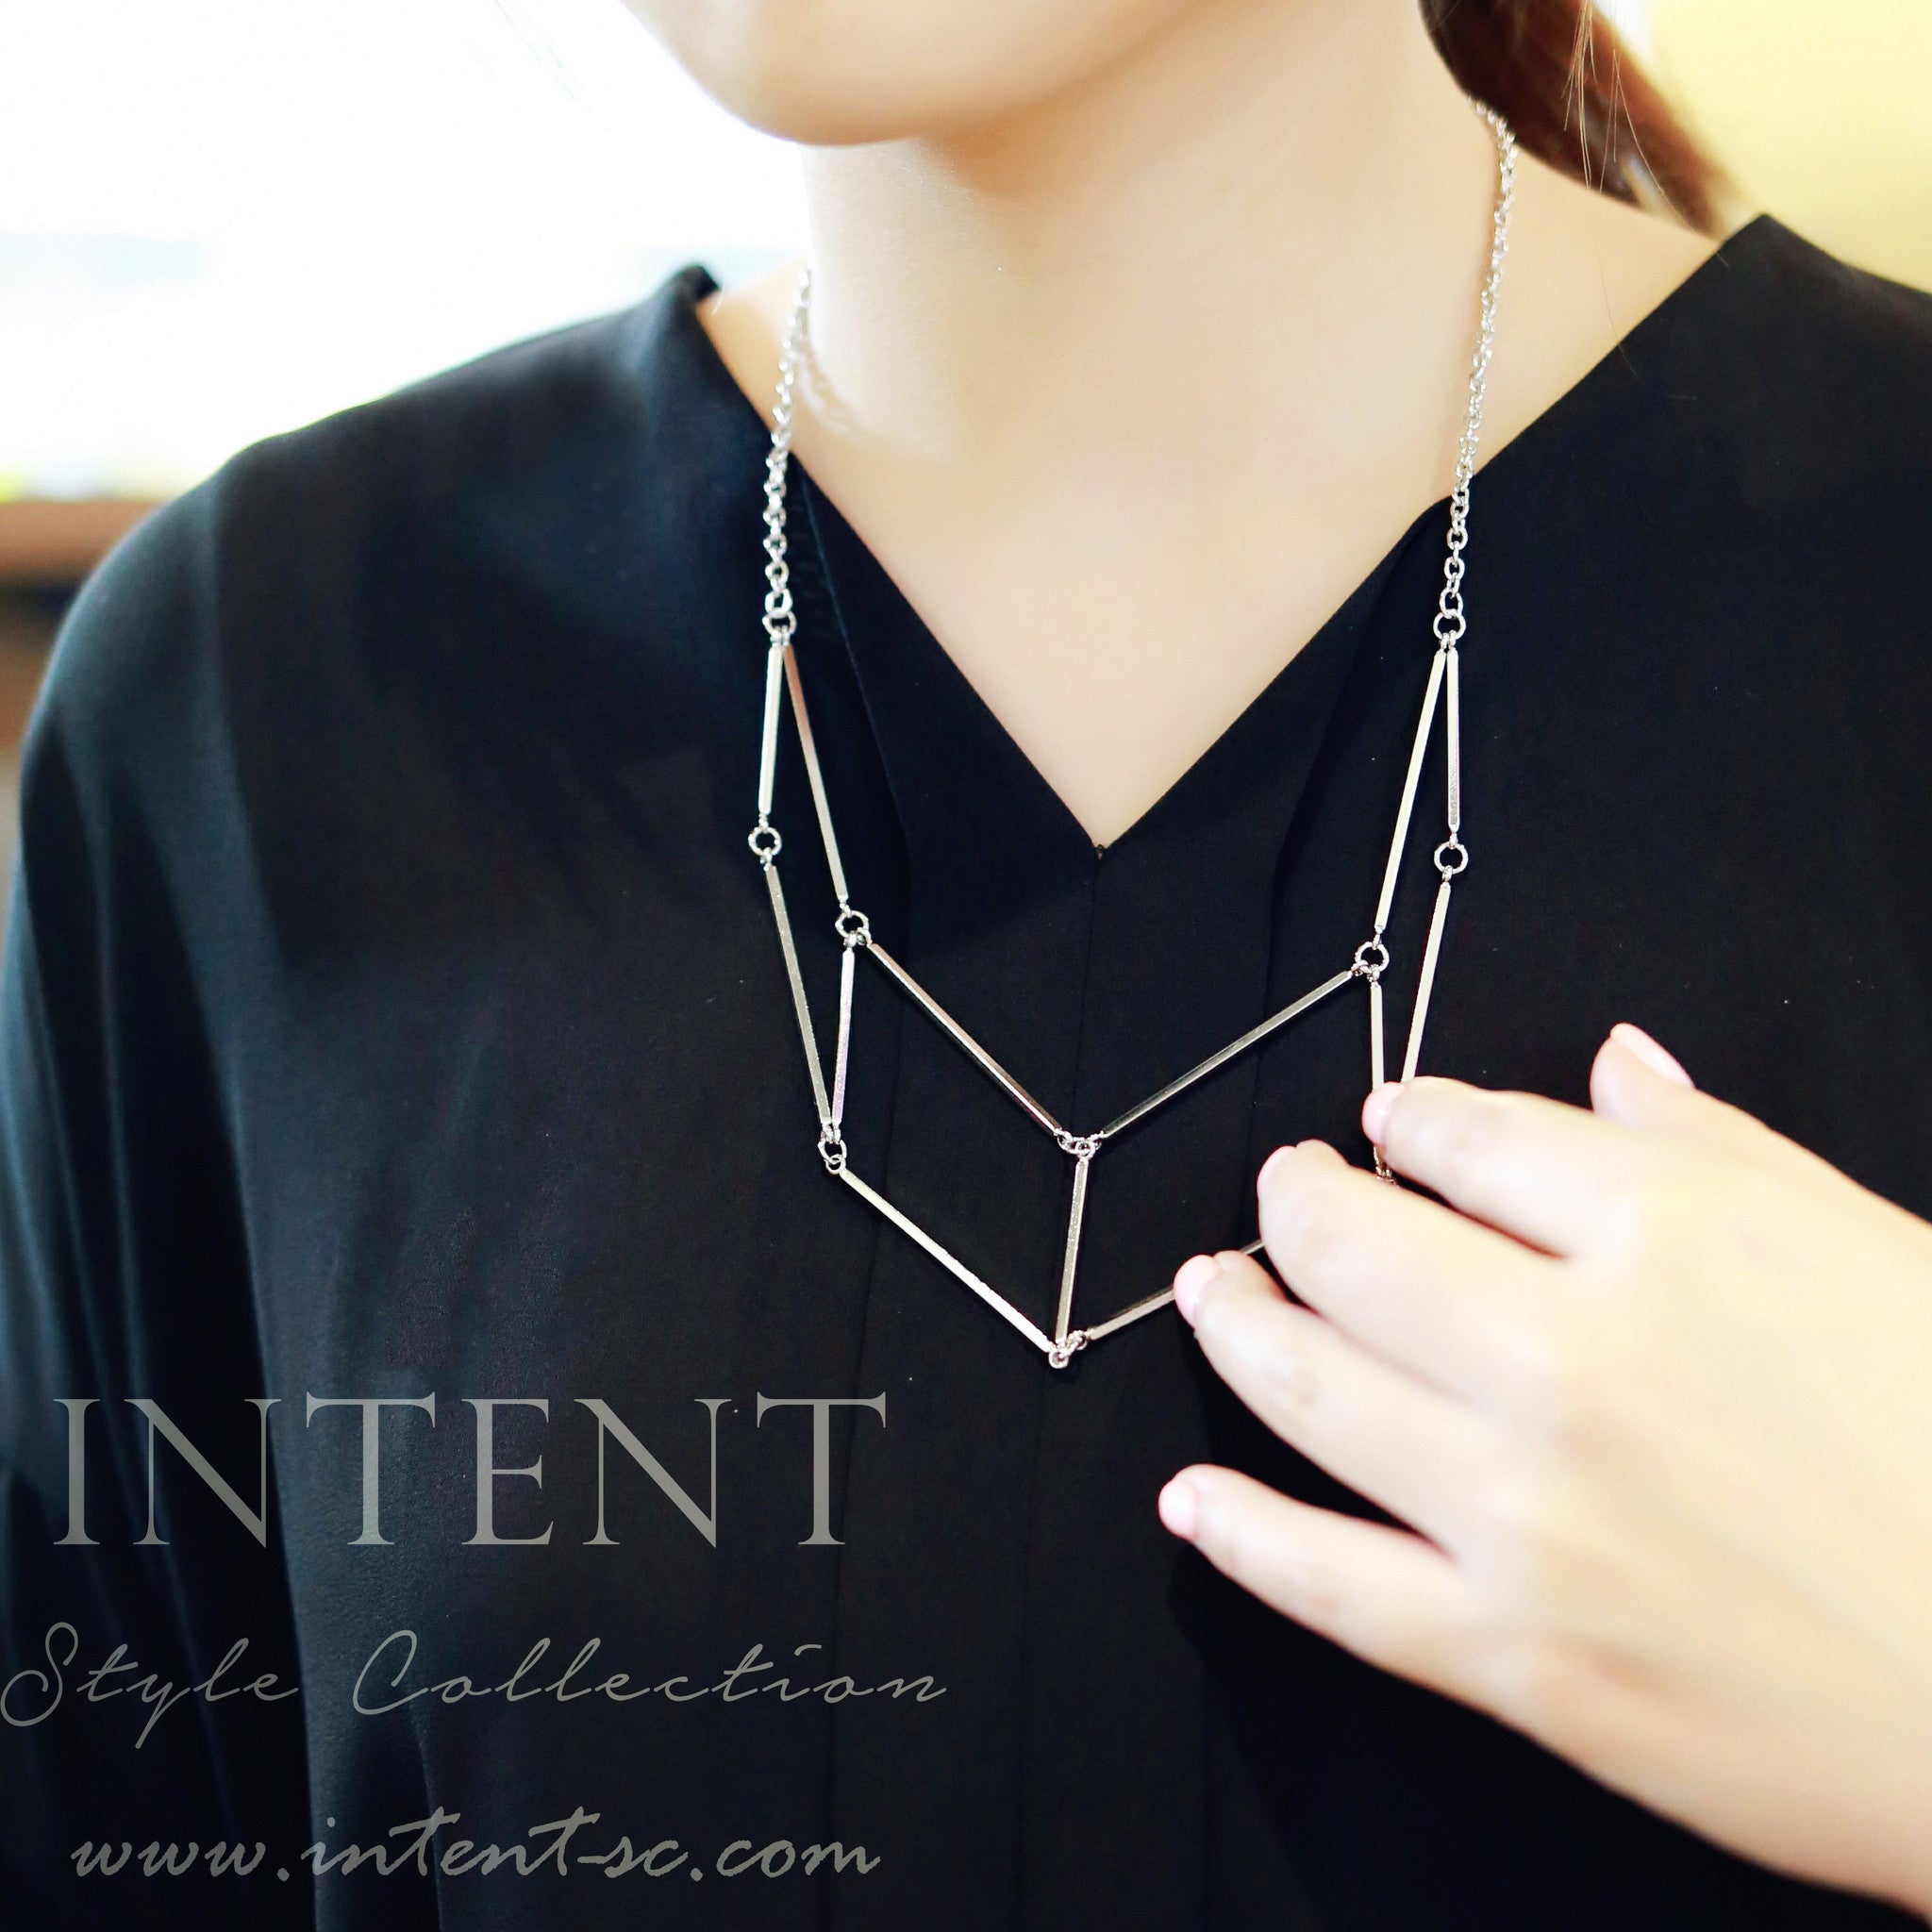 Silver Plate Necklace / NL8059